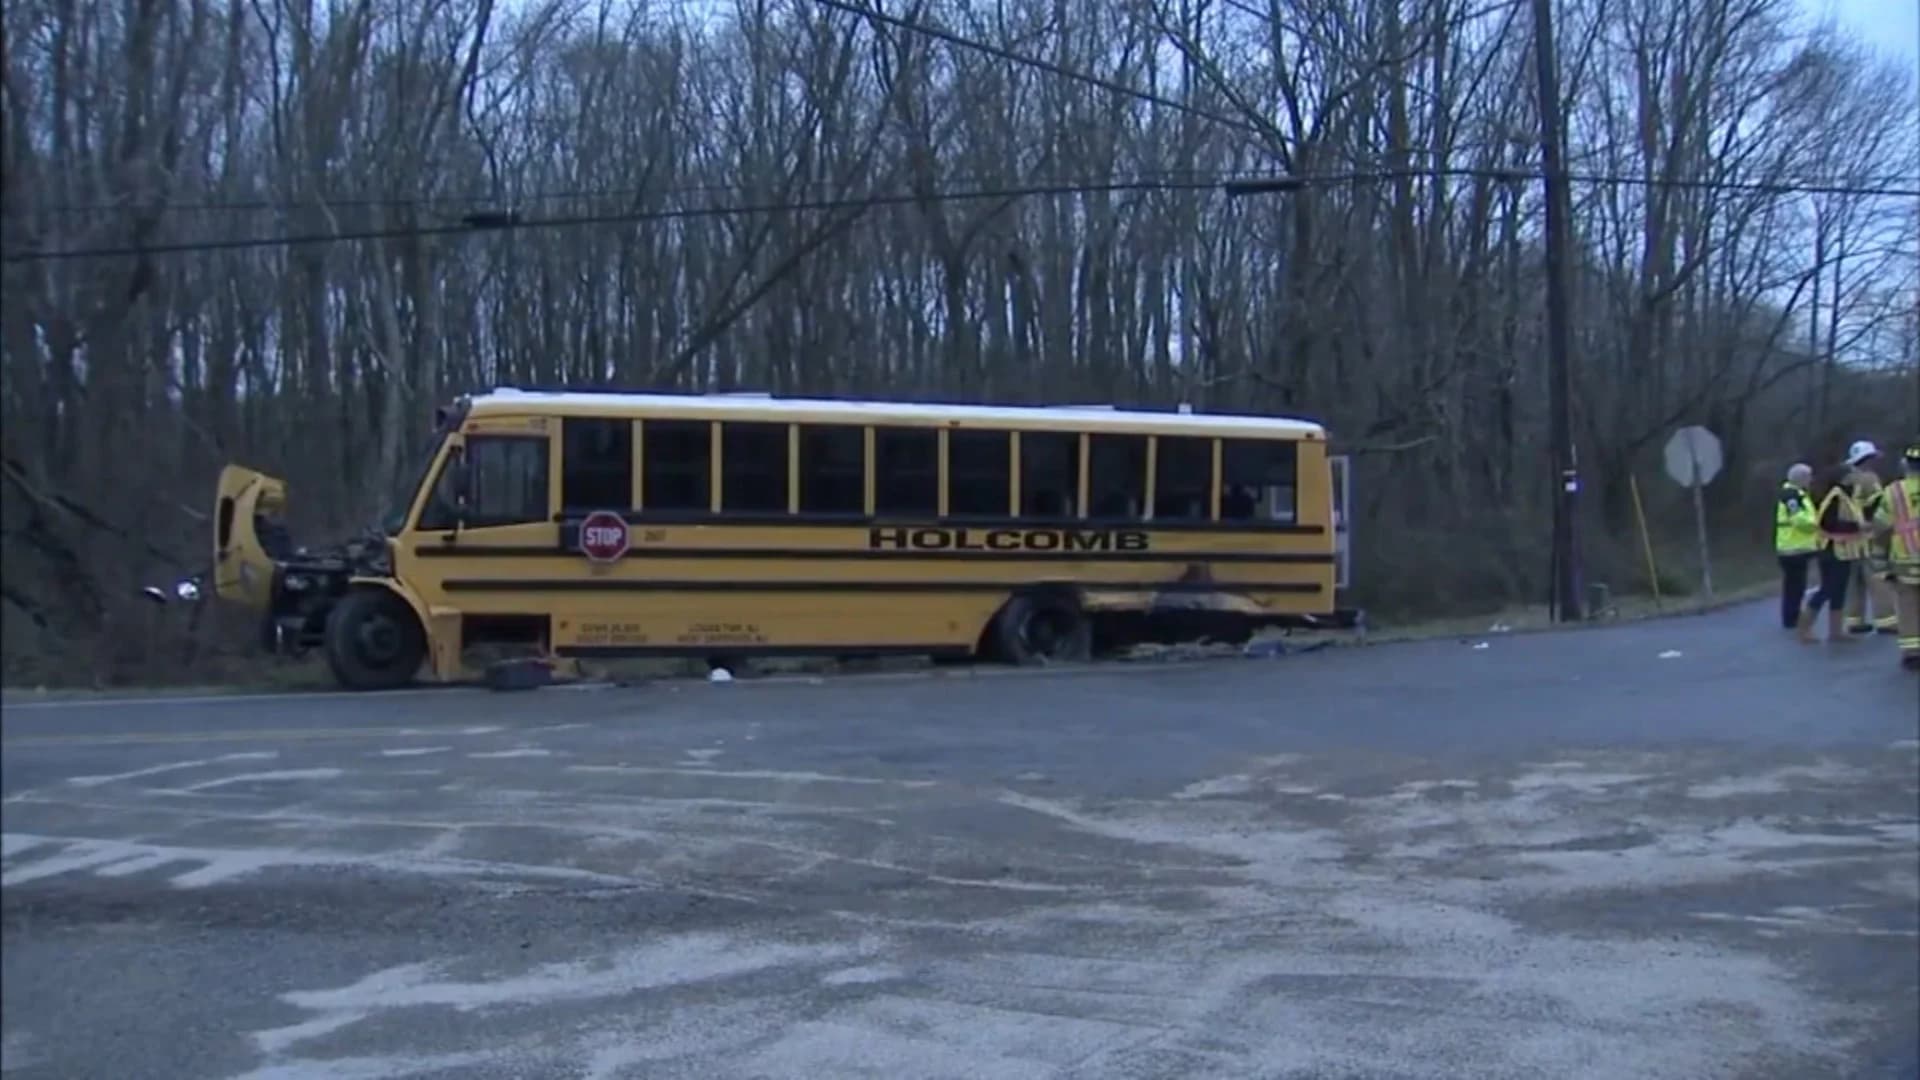 New Jersey school bus driver to face citations in crash that injured 14